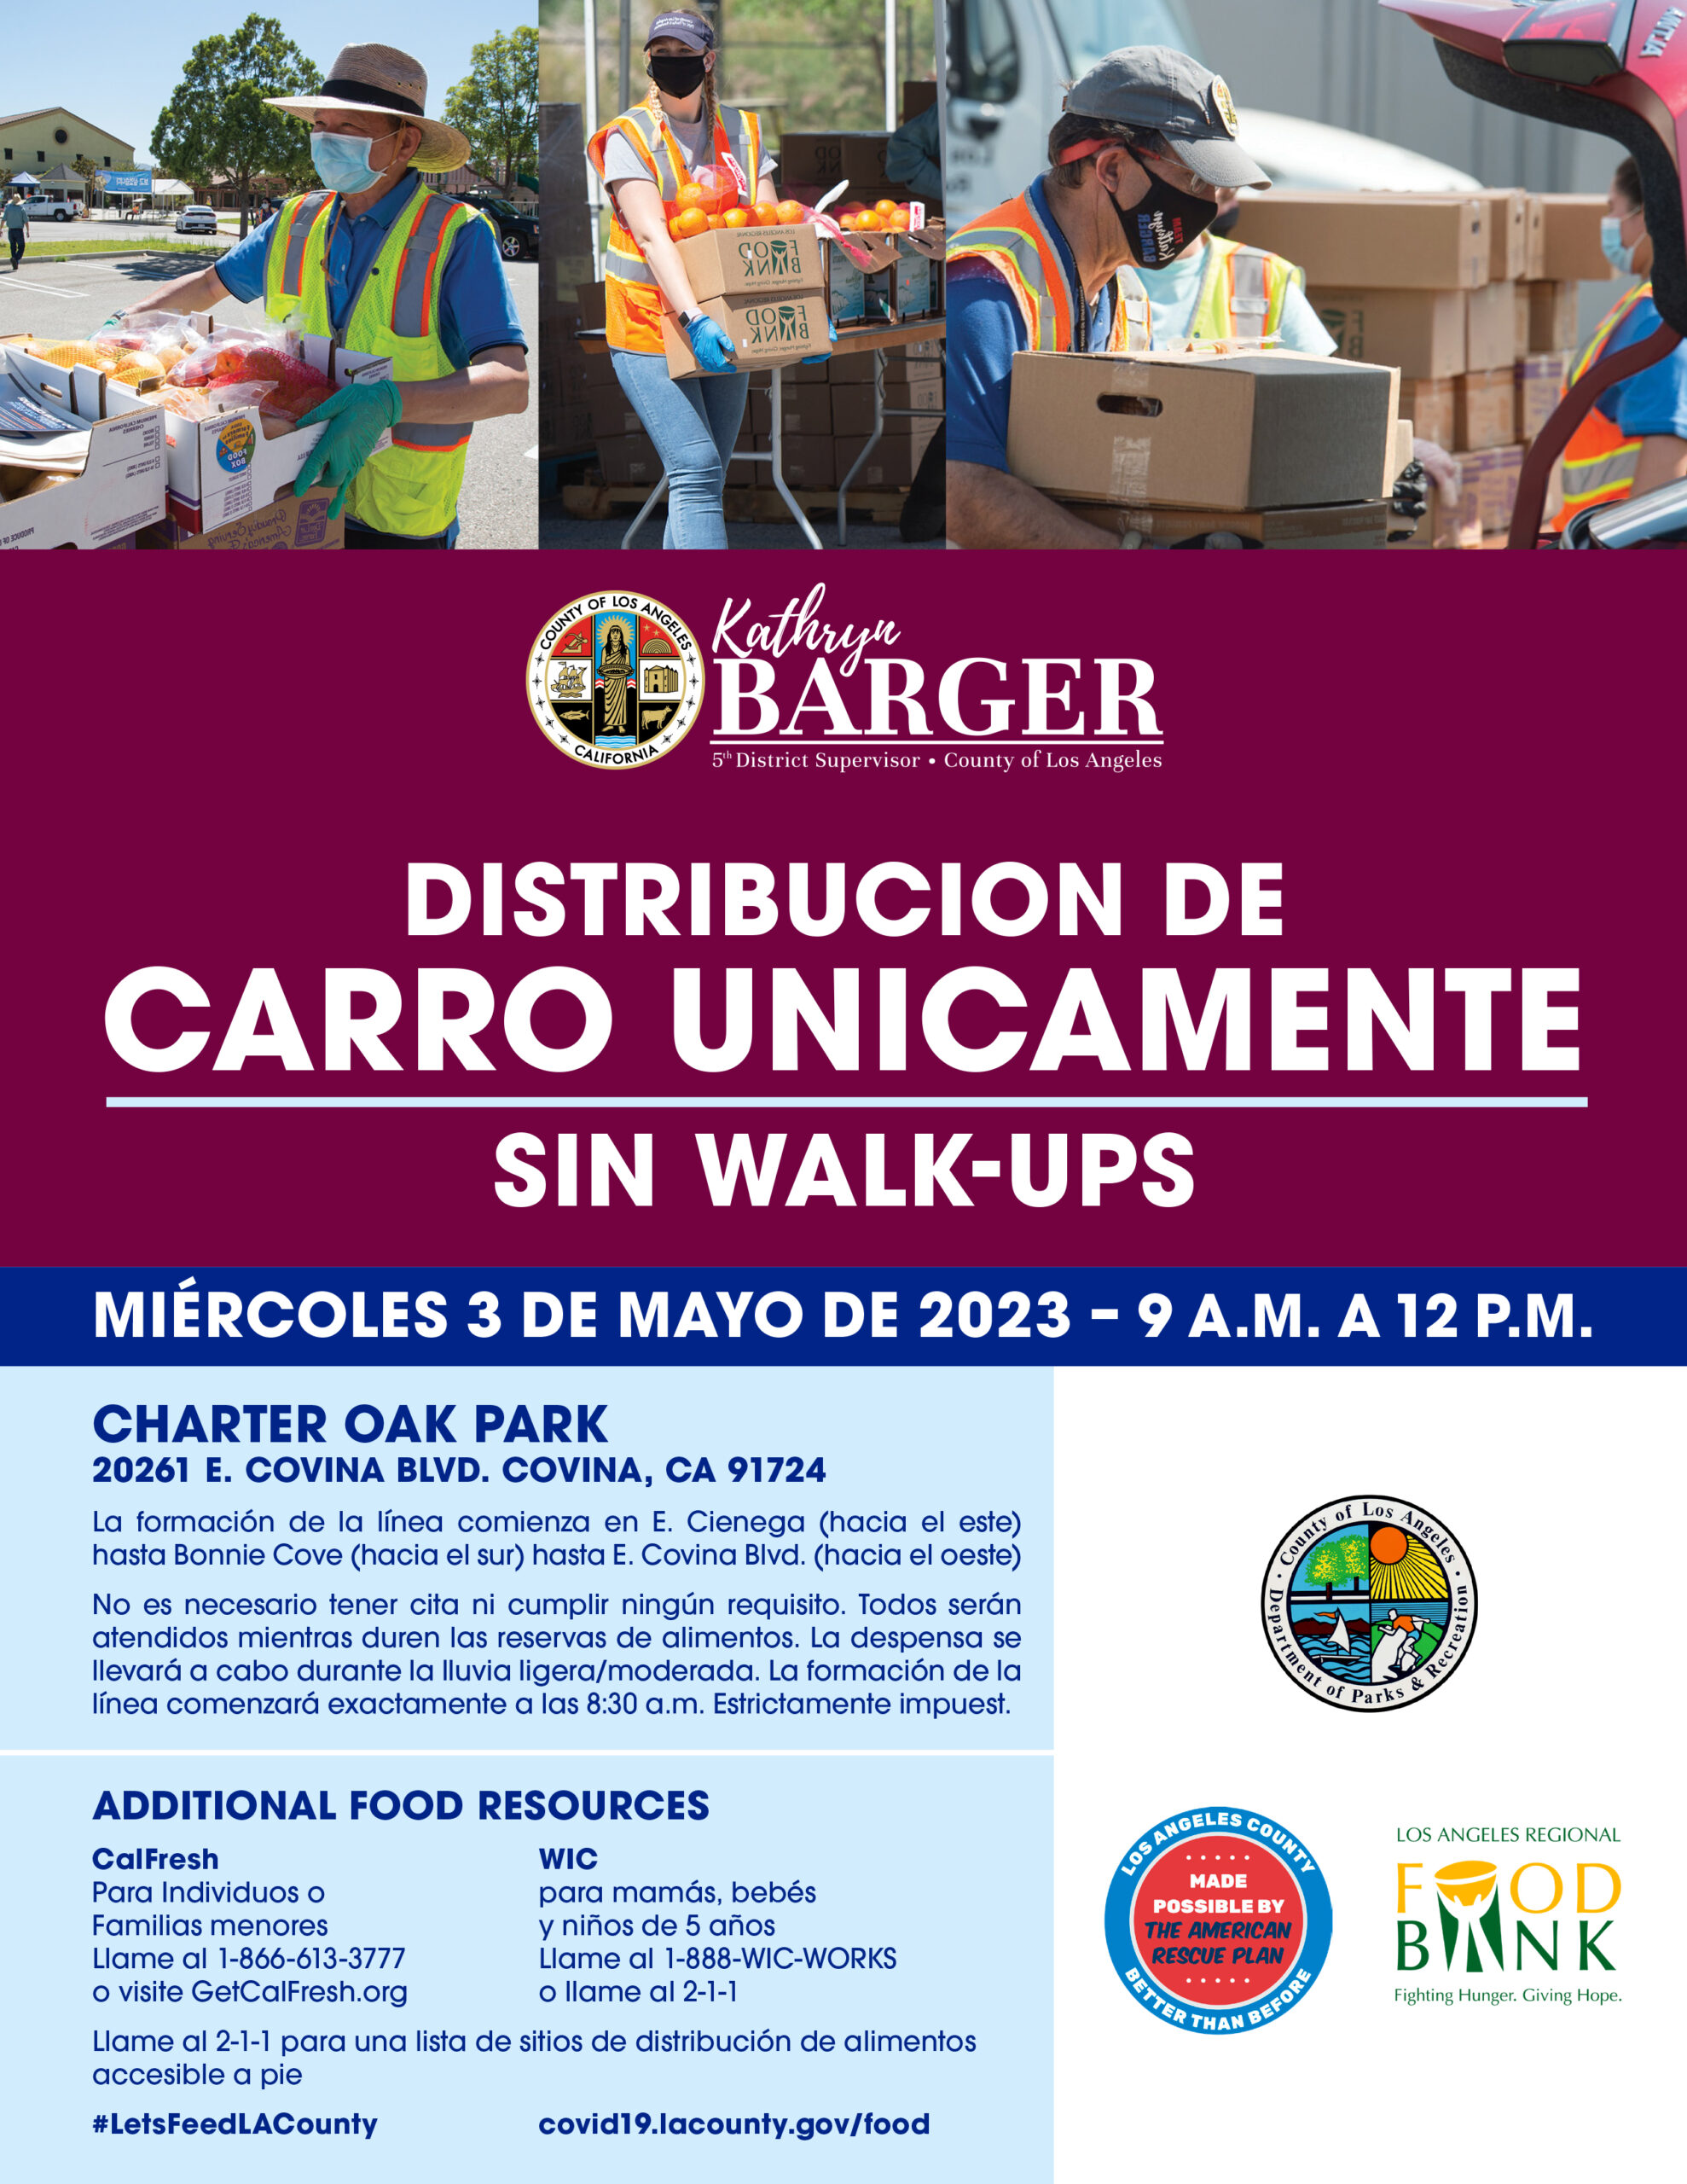 free food giveaway from Kathryn Barger Spanish flyer 